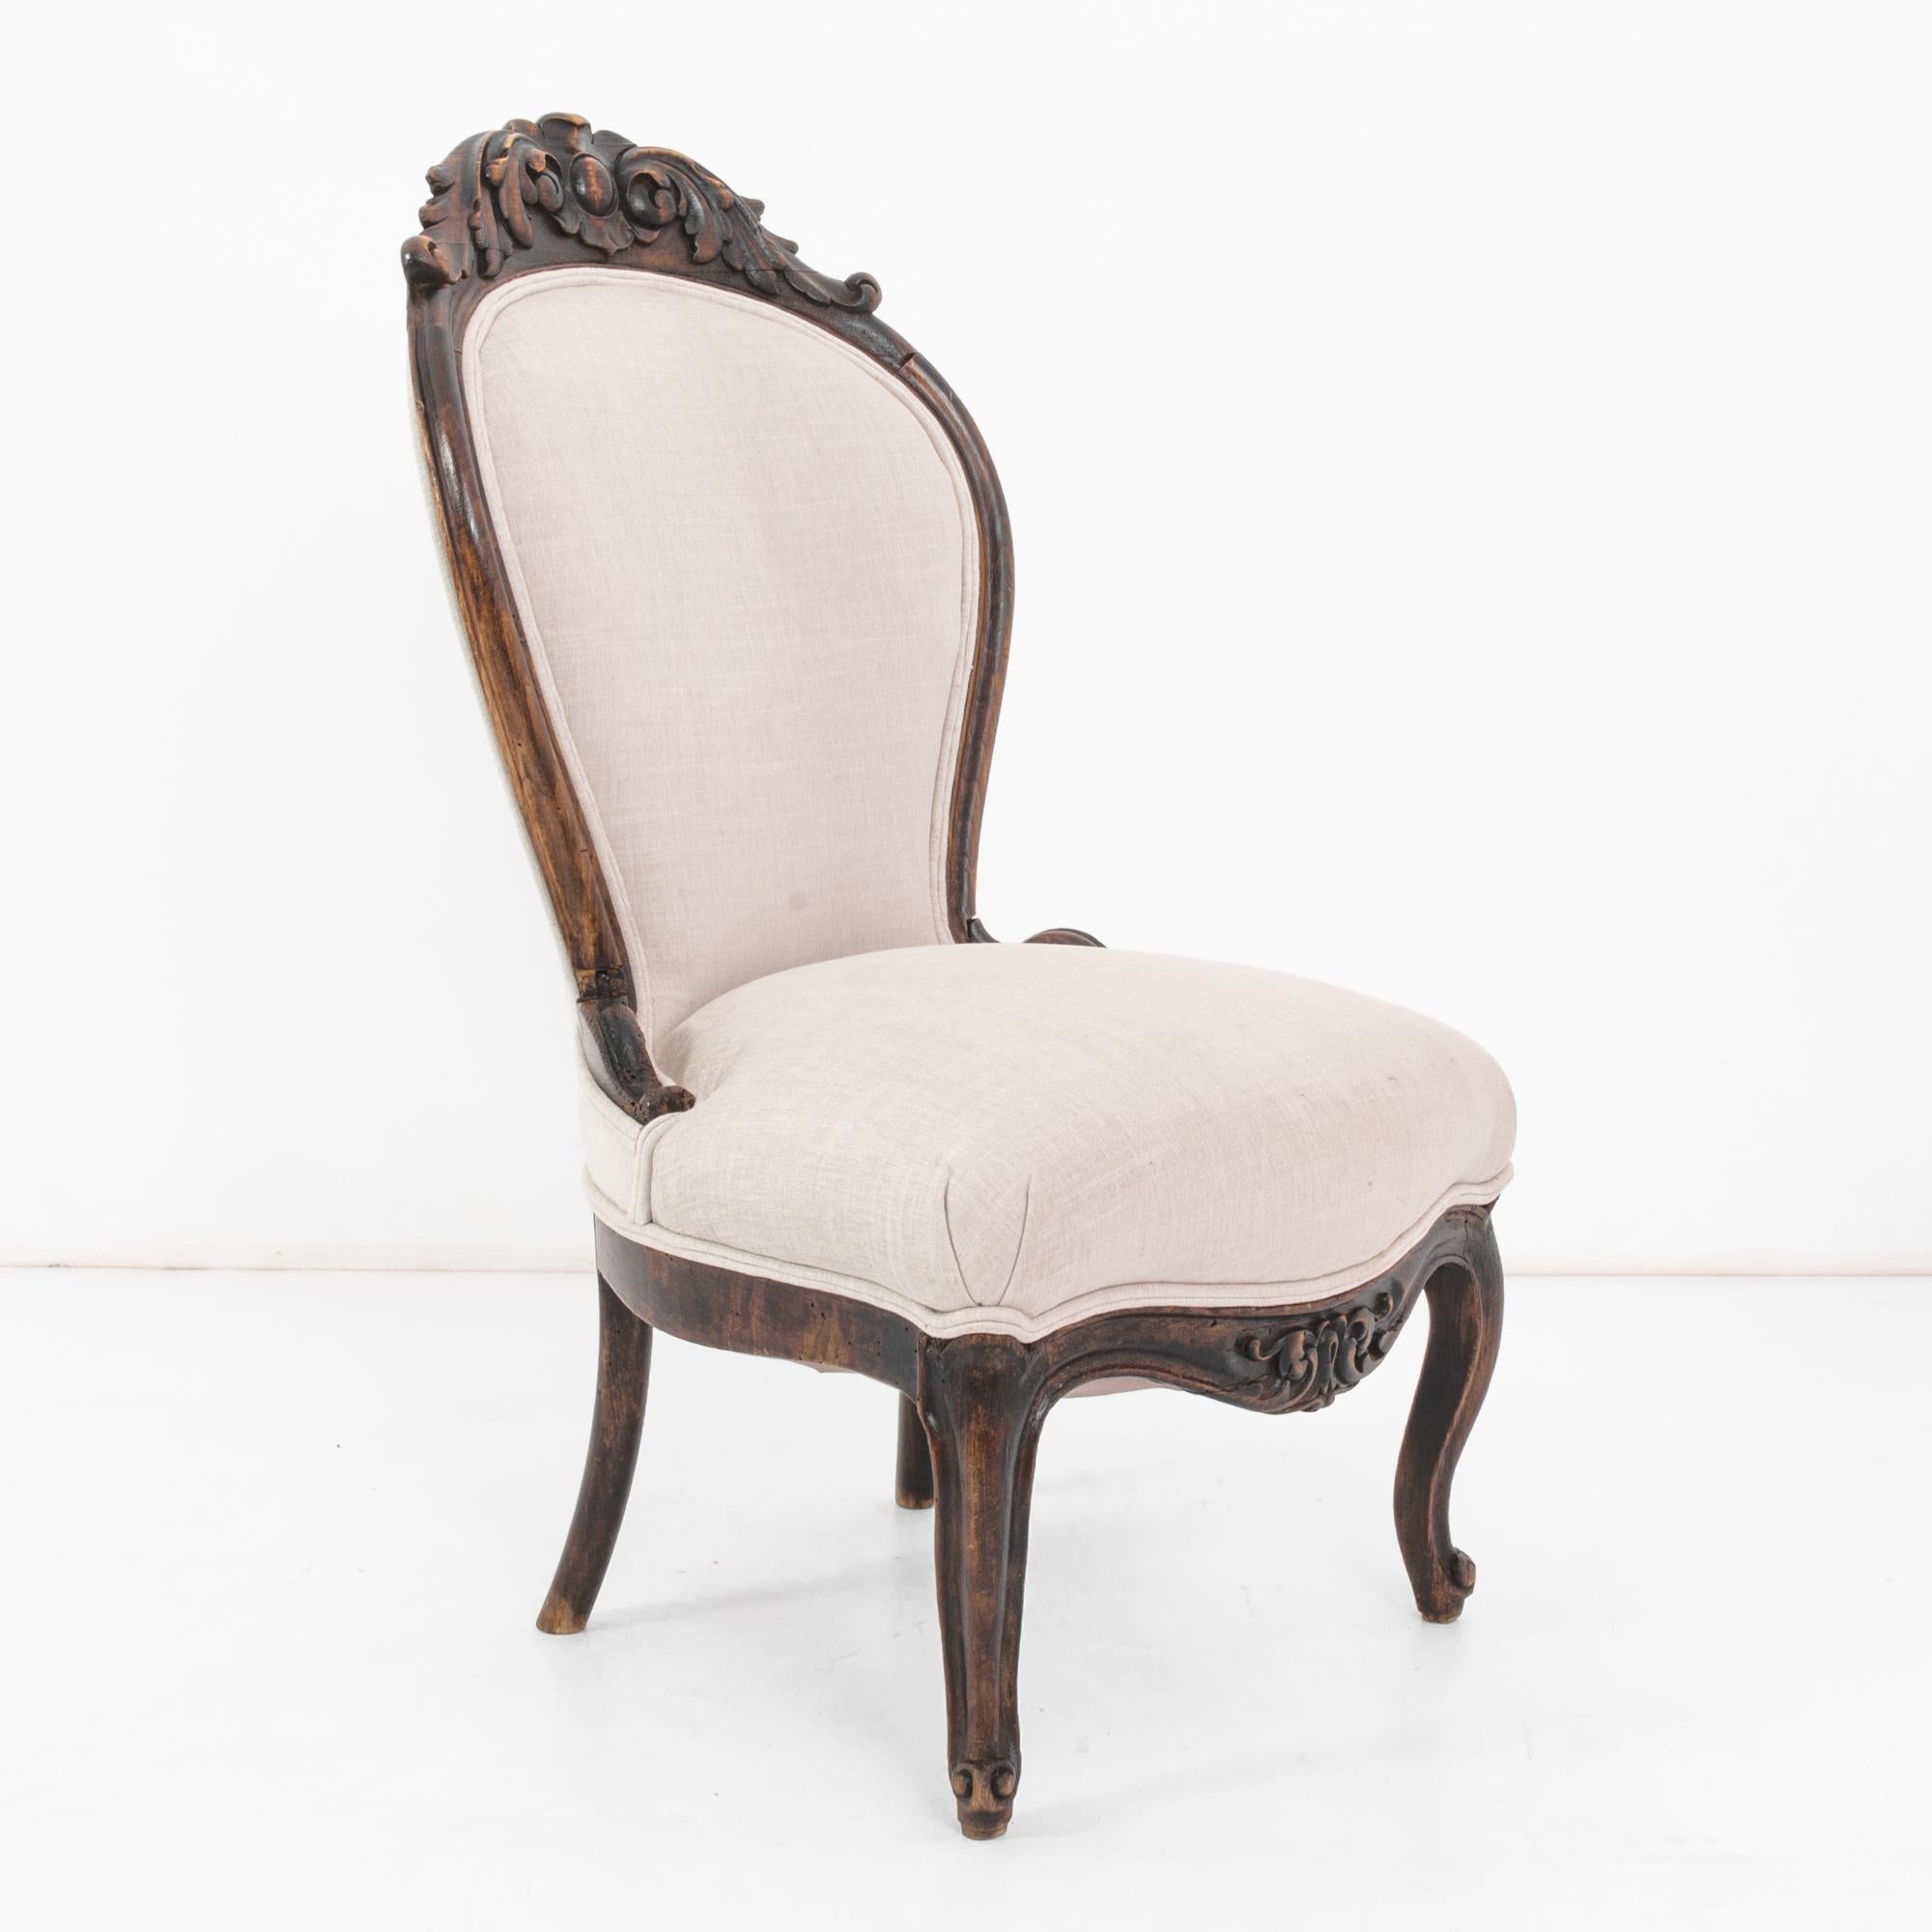 1880s French Wooden Chair with Upholstered Seat and Back For Sale 5